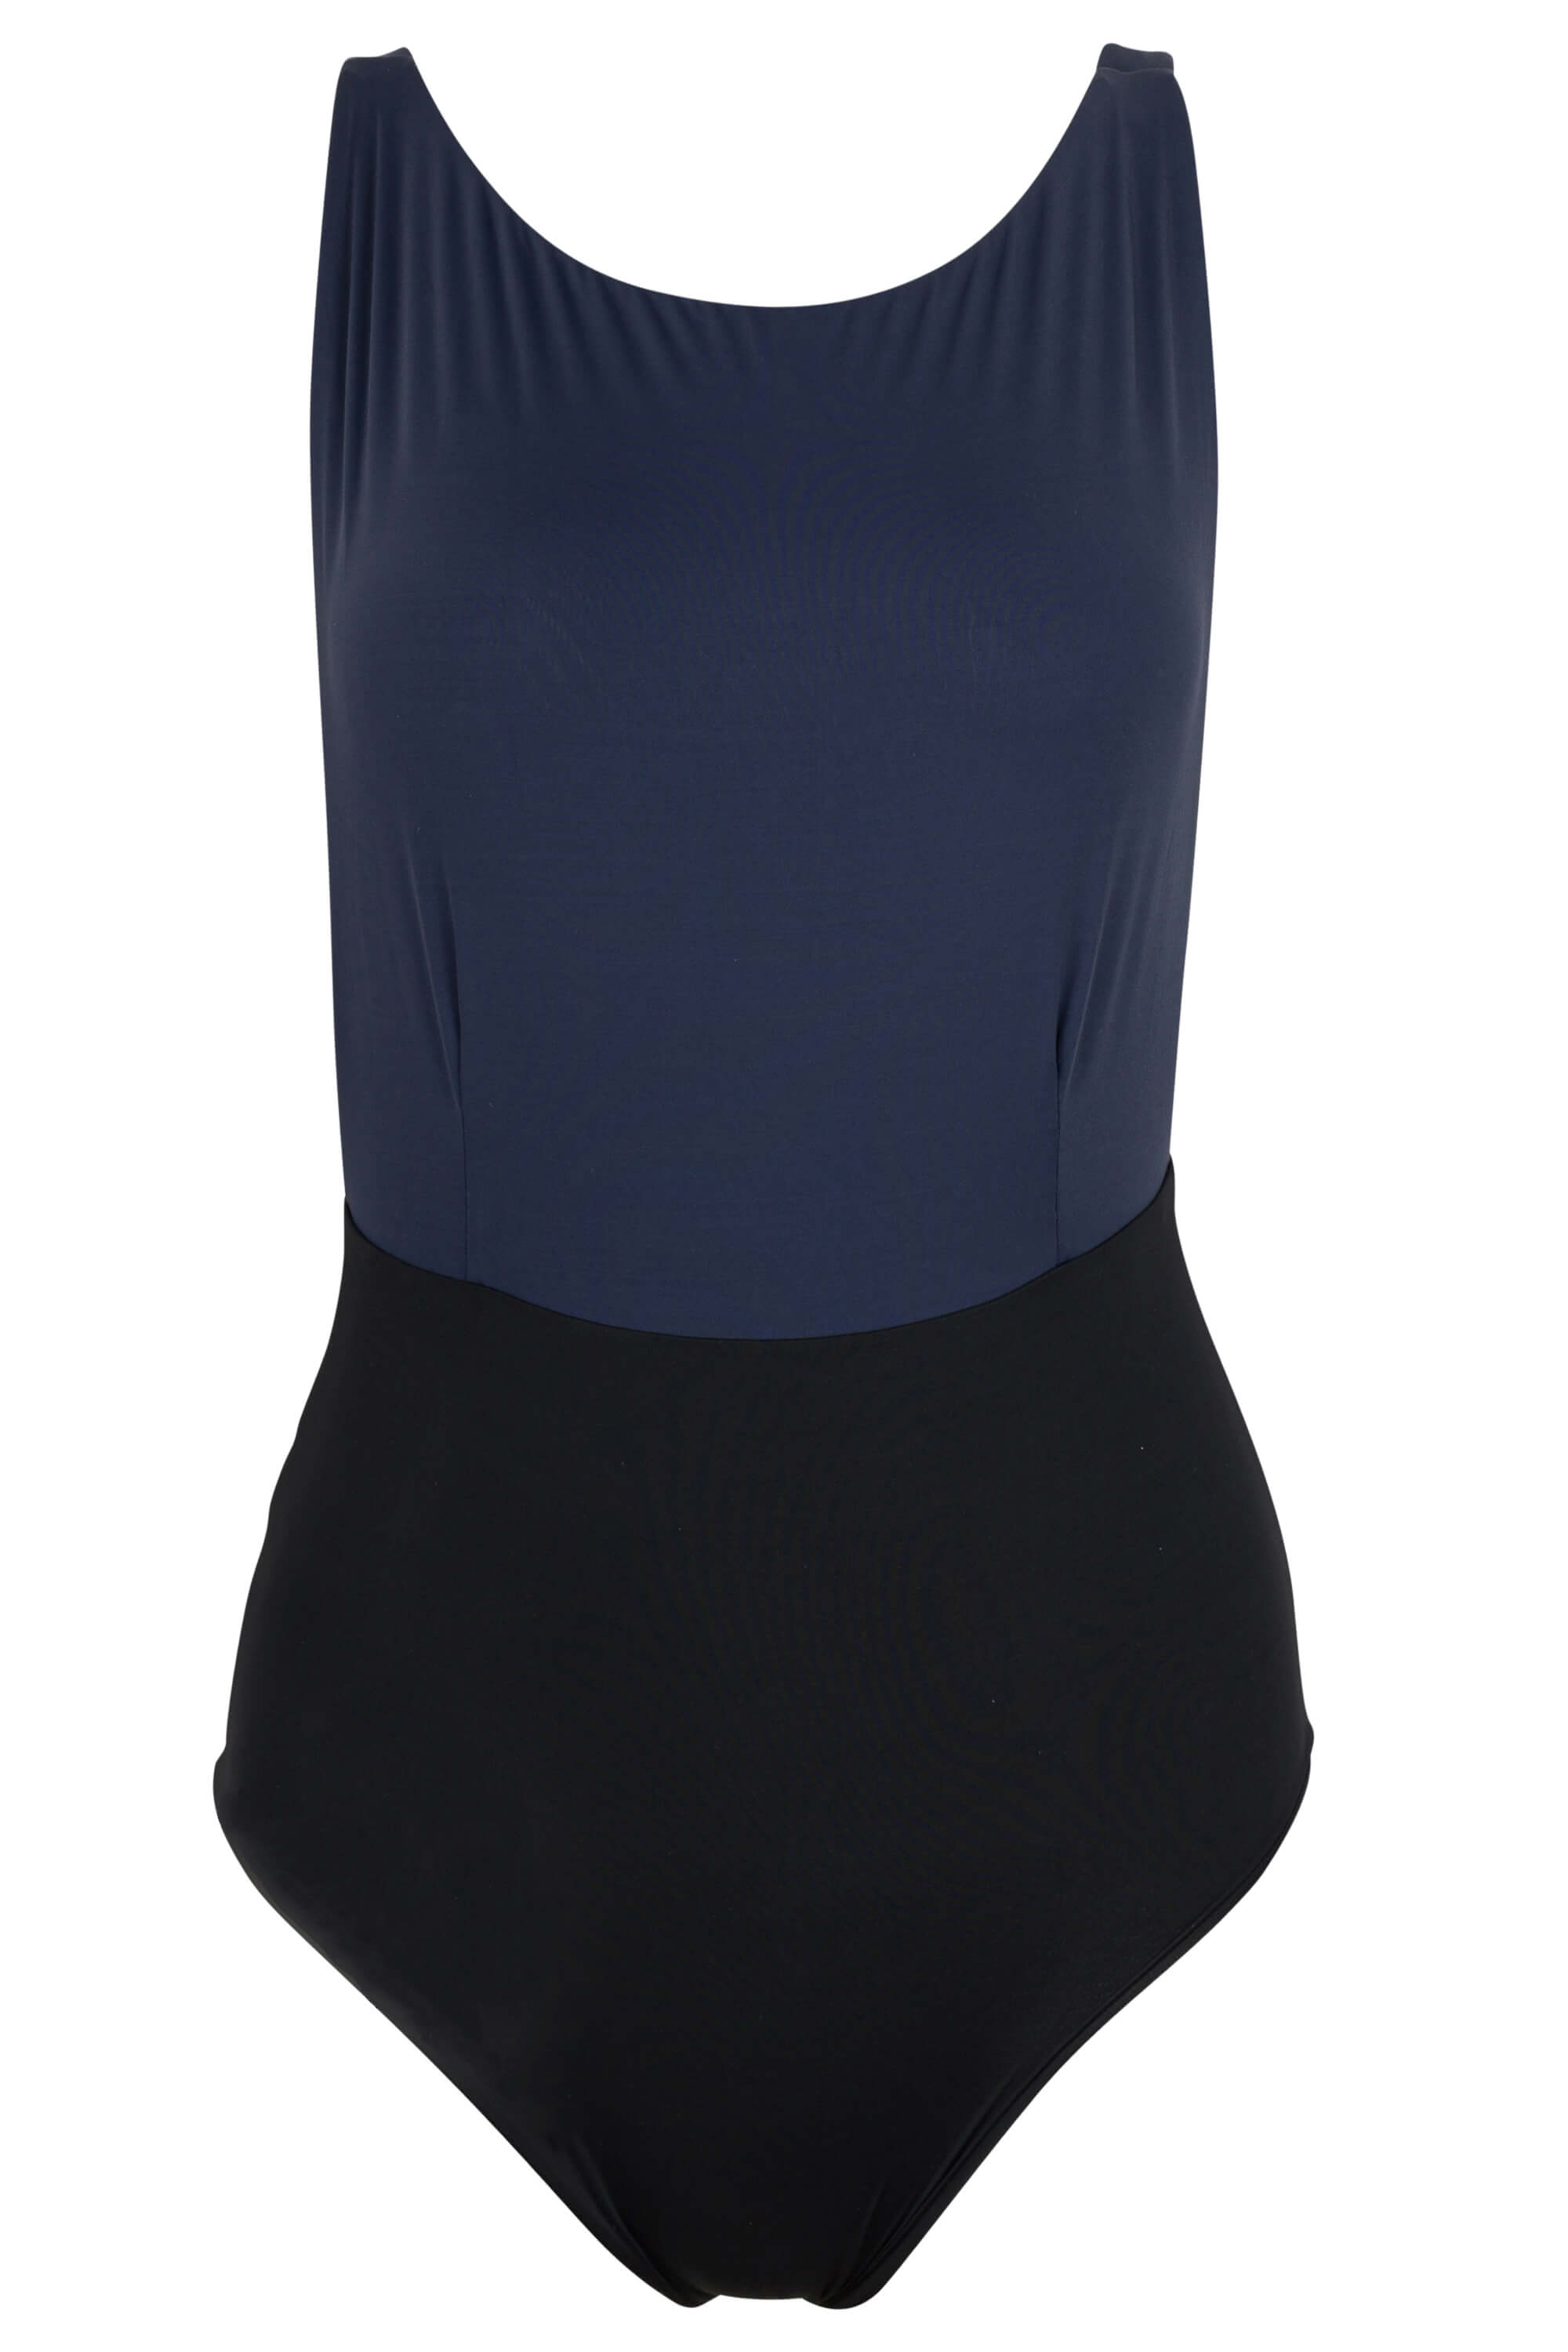 Kate one piece swimsuit in black and navy.